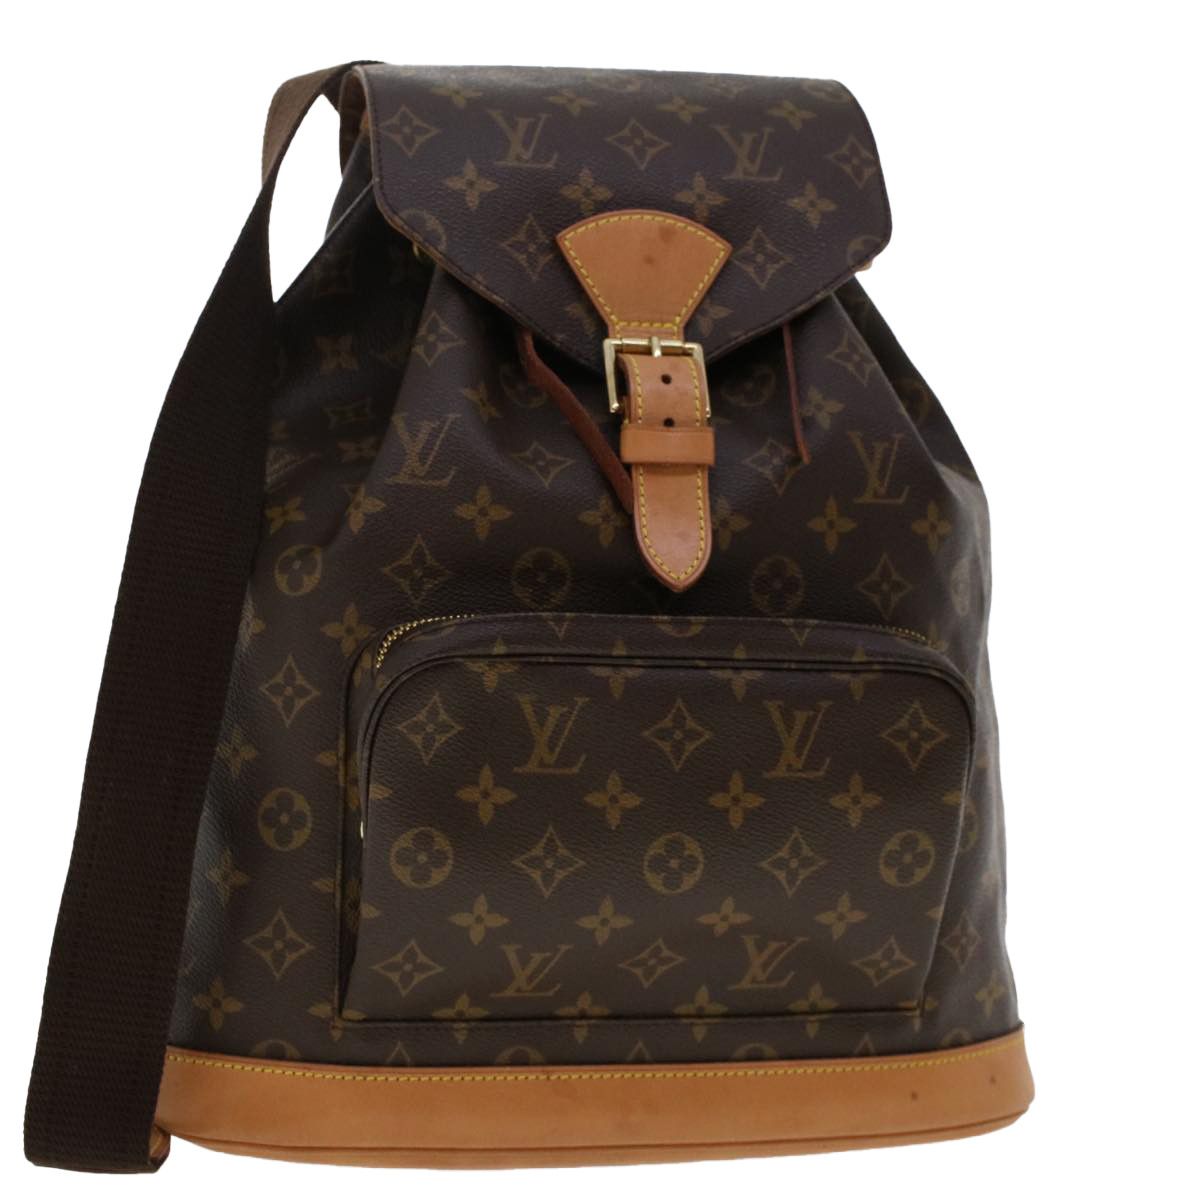 LOUIS VUITTON LV SHW Discovery Backpack Rucksack M46553 Monogram